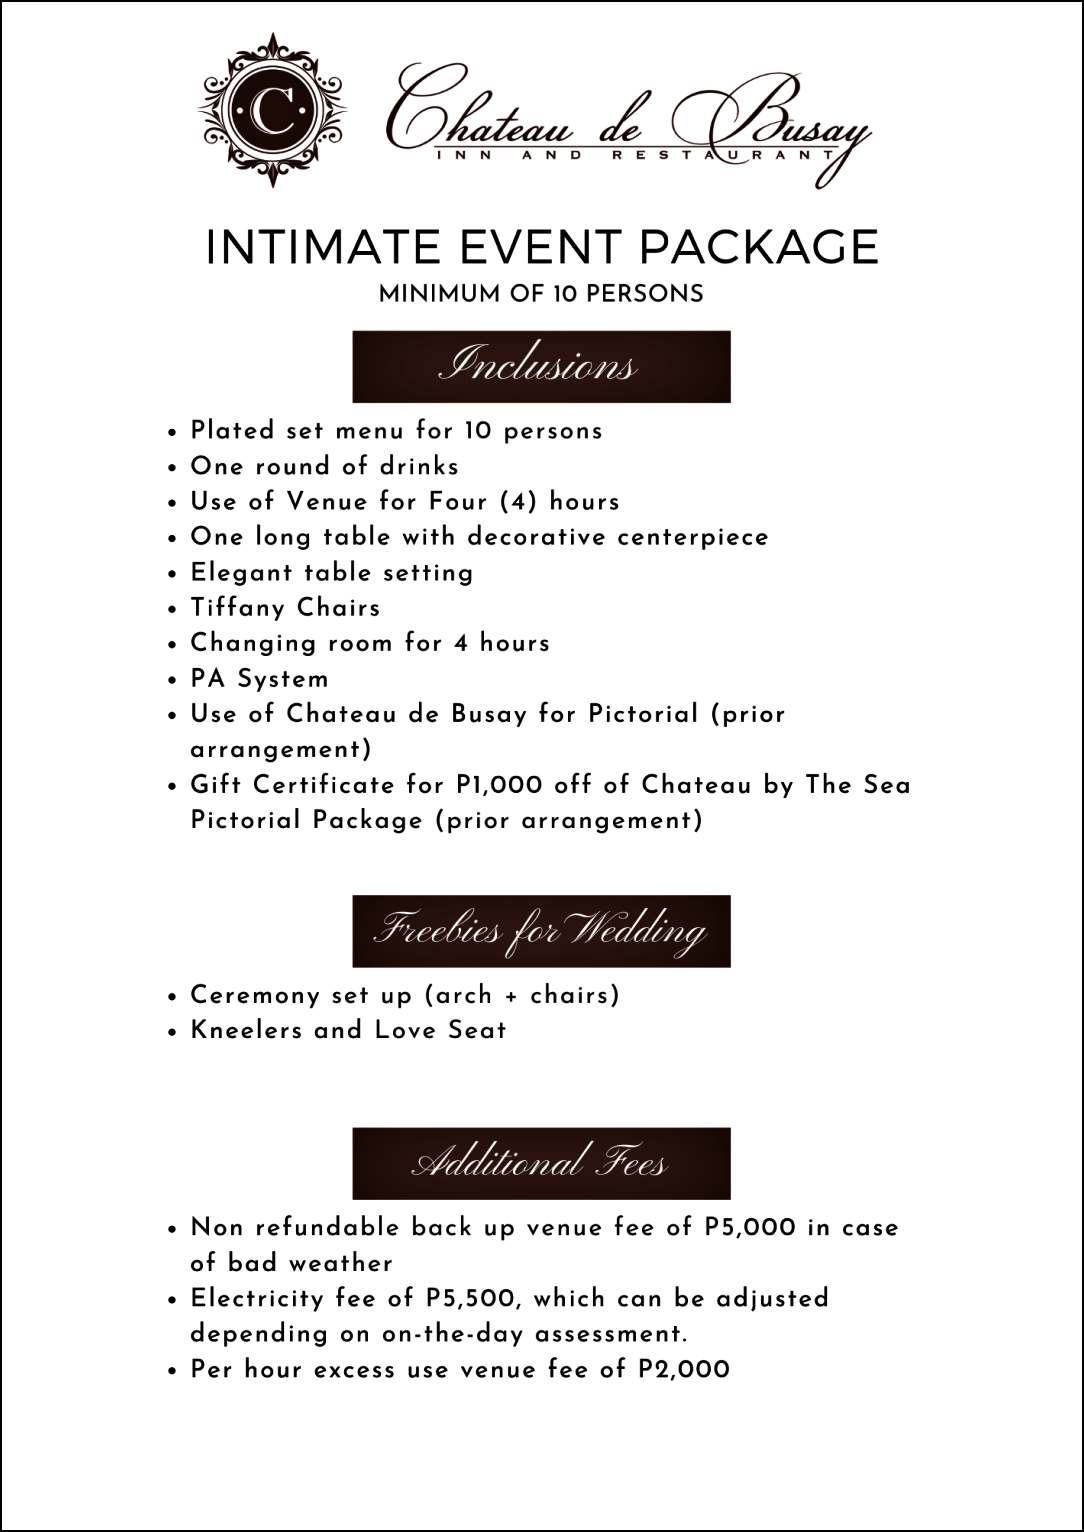 INTIMATE EVENT PACKAGE